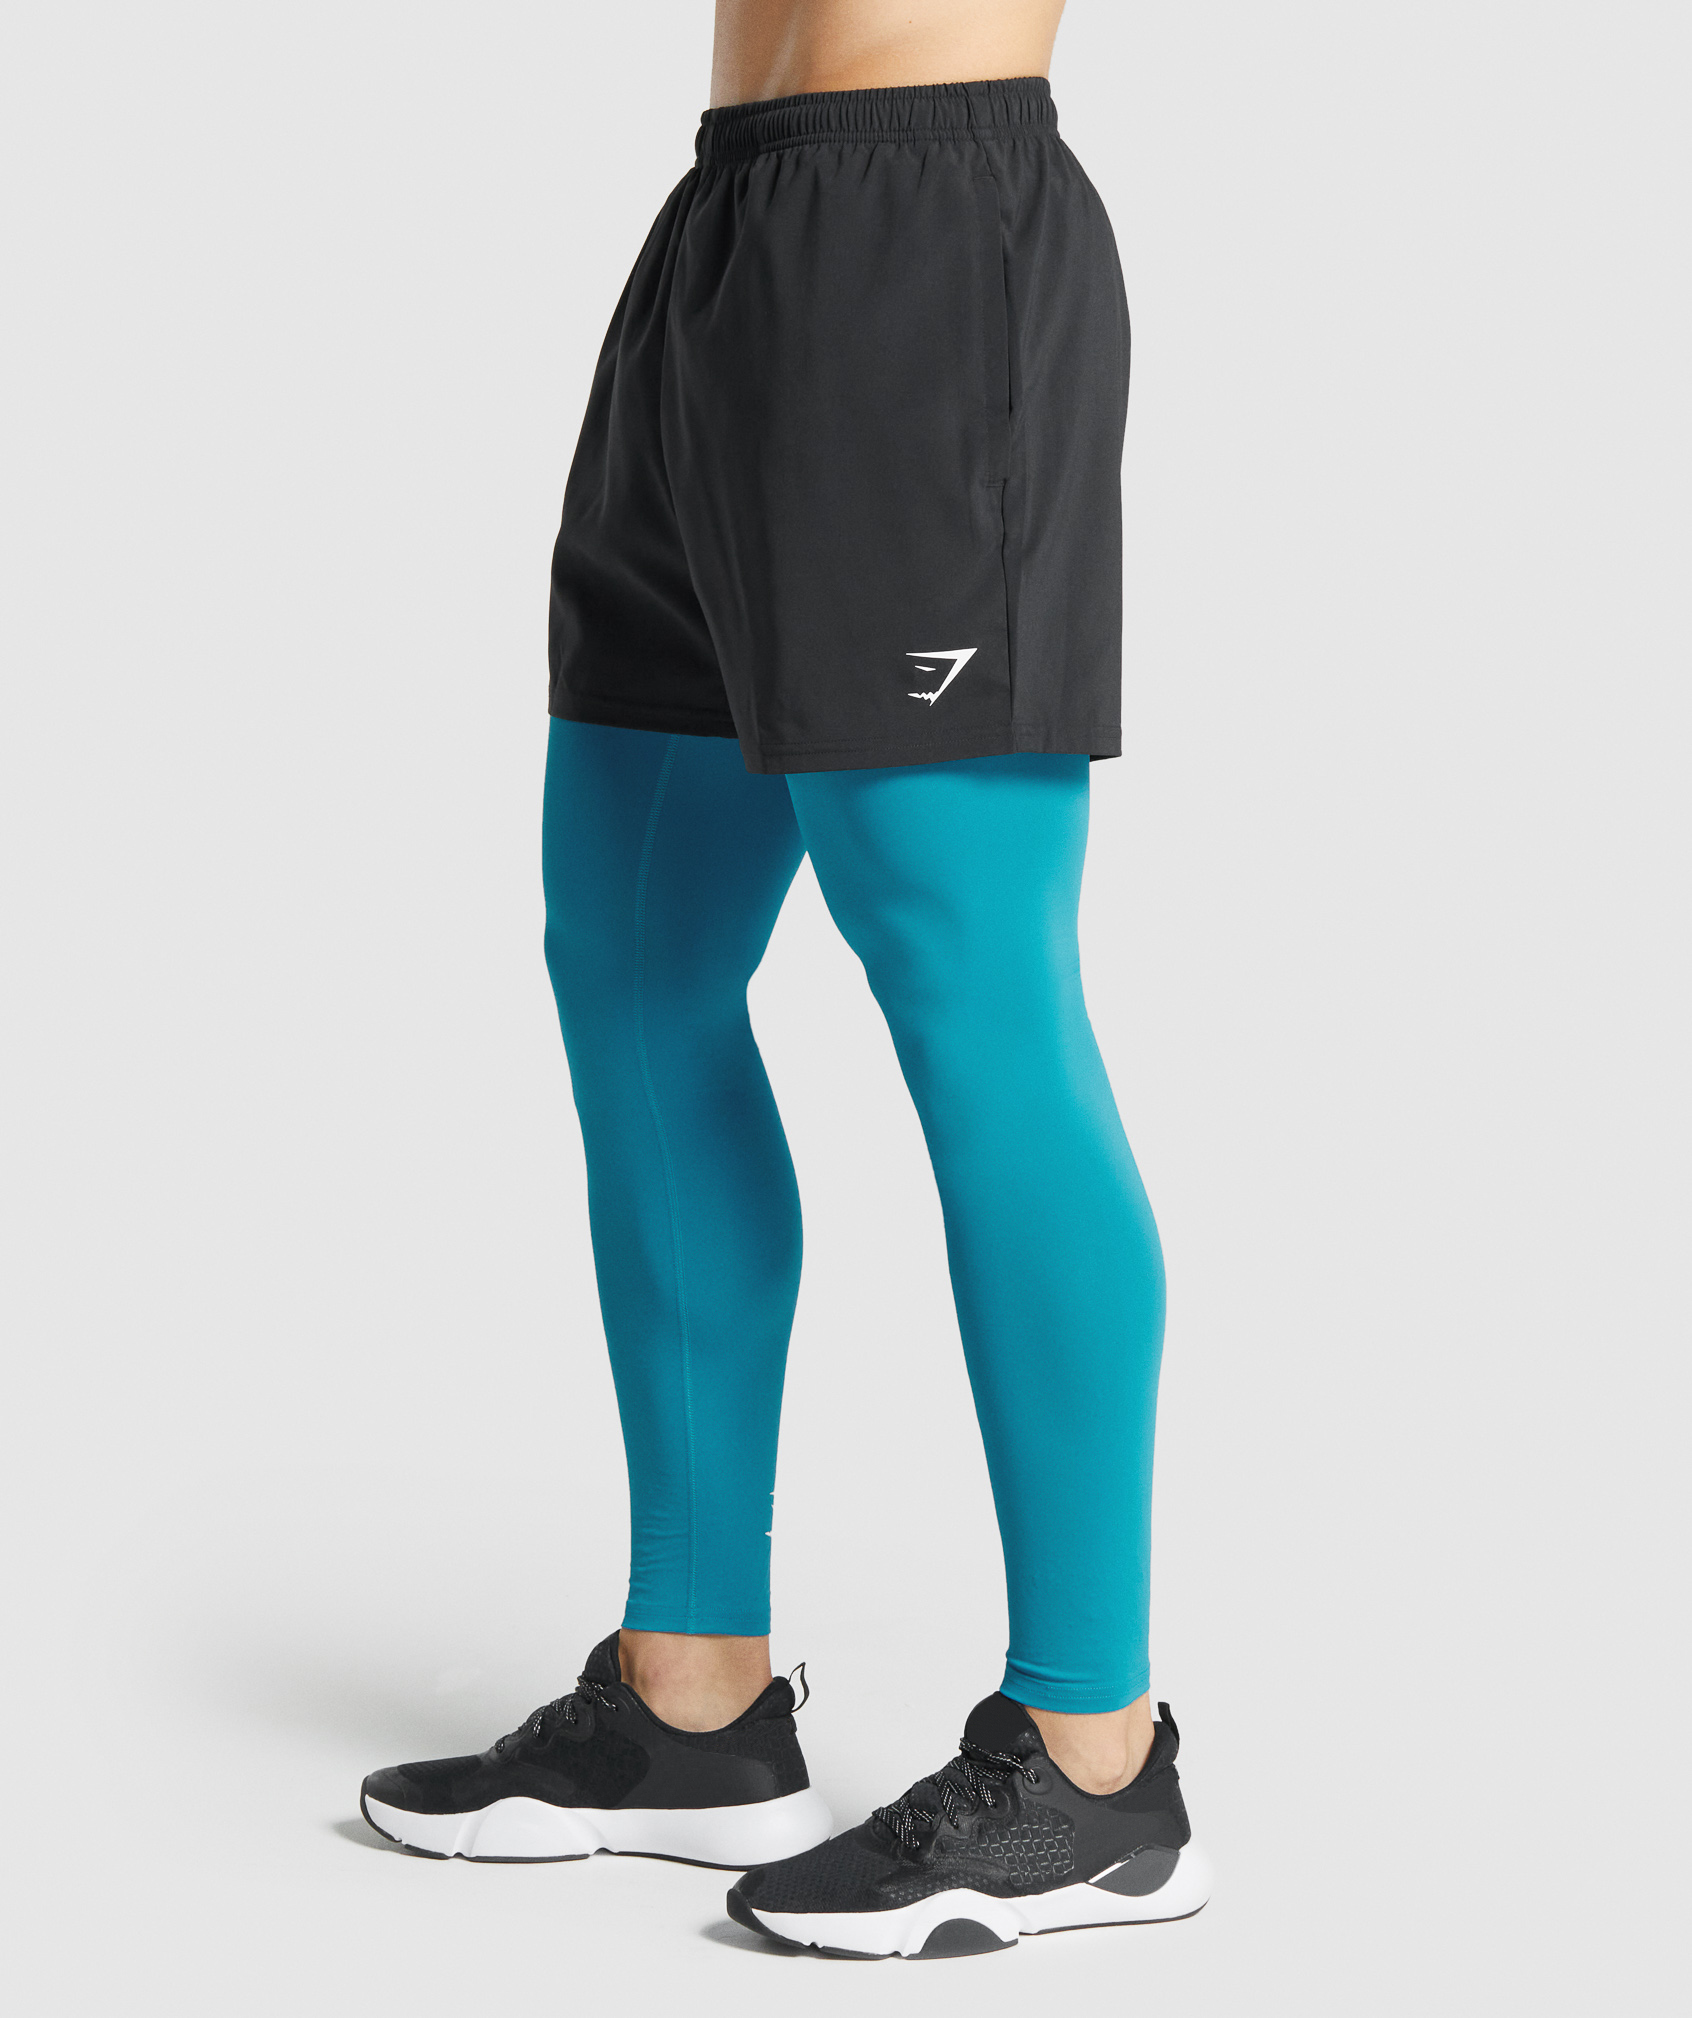 Should I Wear Shorts Over My Compression Tights?